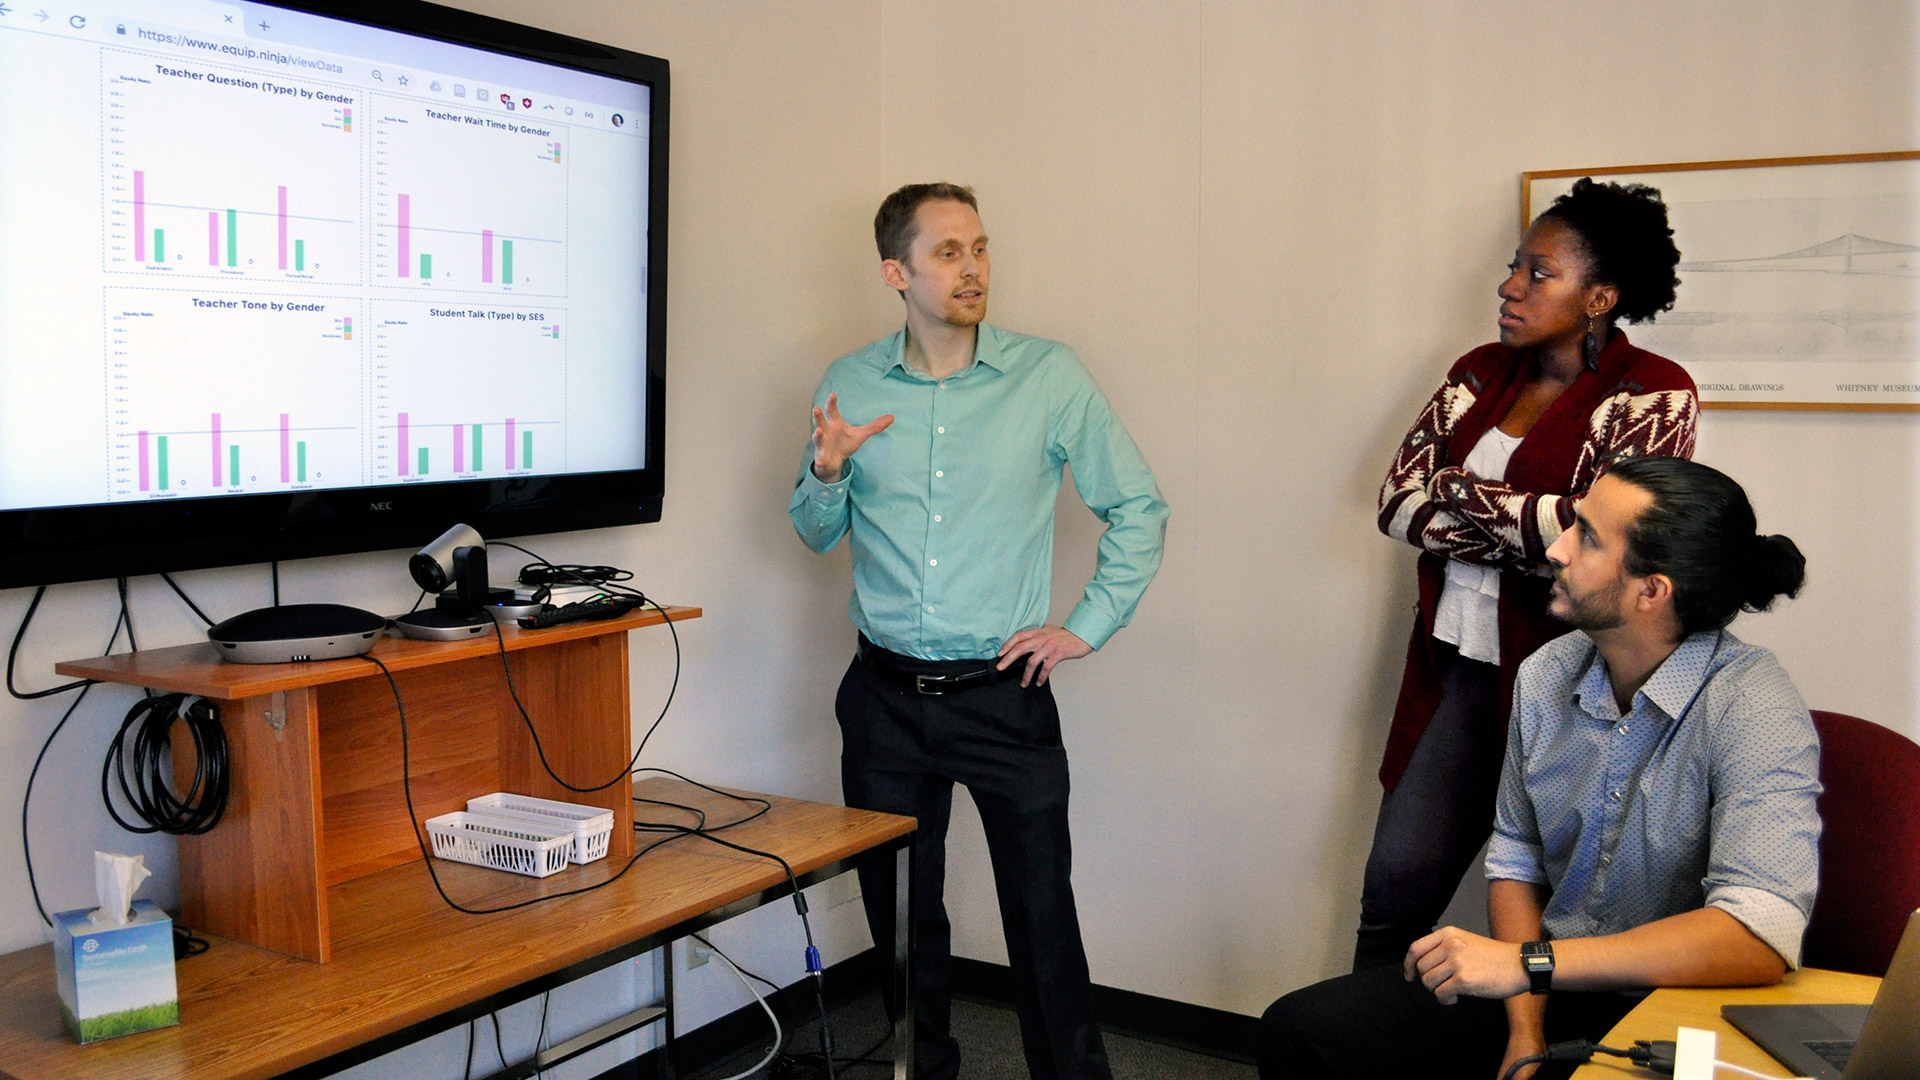 Daniel Reinholz demonstrates an app he developed to evaluate classroom equity to his students Amelia Stone and Antonio Martinez. 